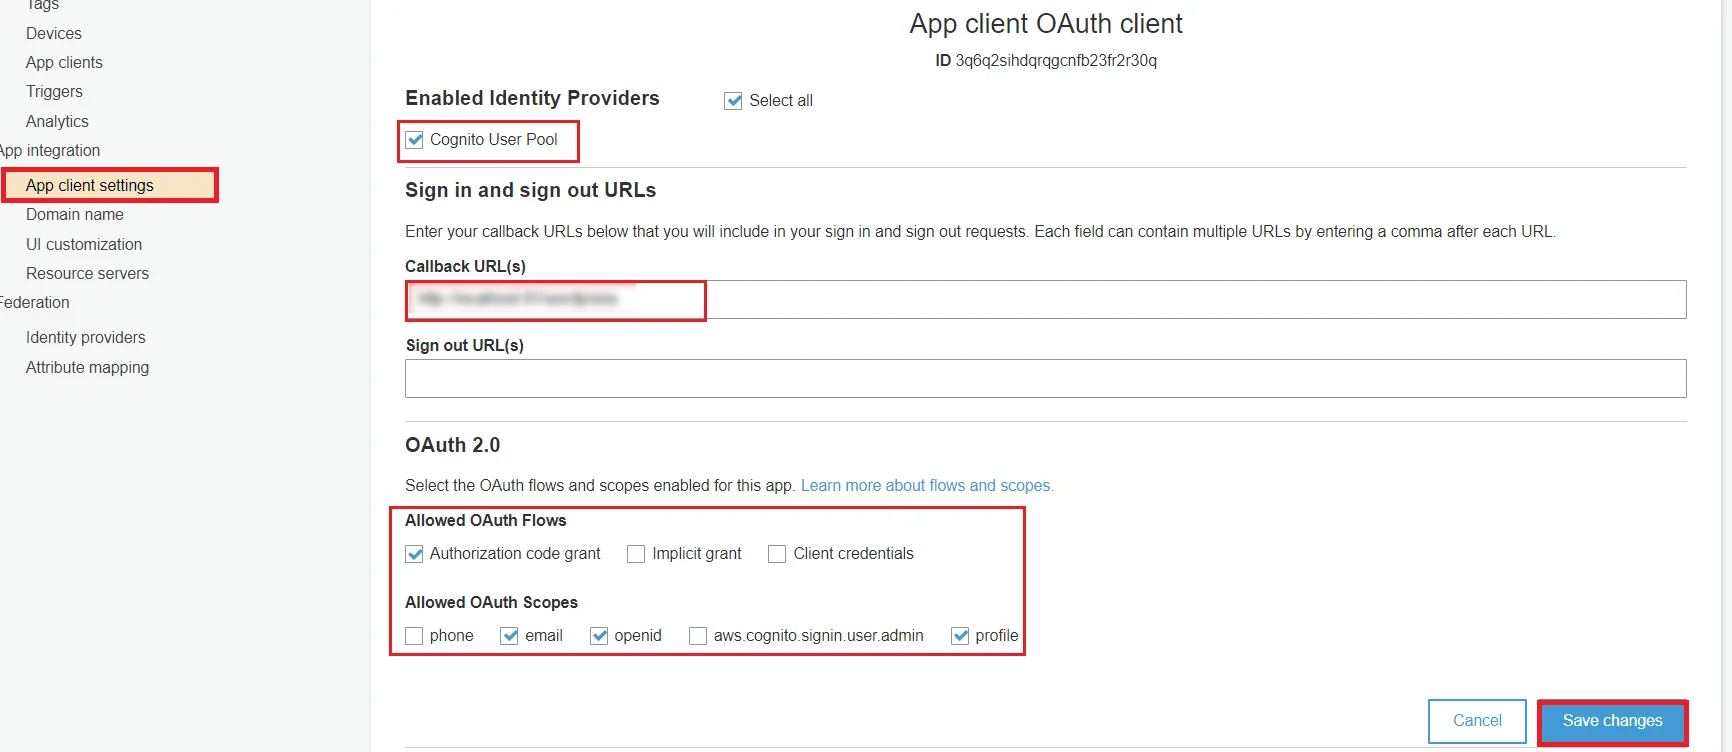 OAuth/OpenID/OIDC Single Sign On - AWS Cognito App Client save